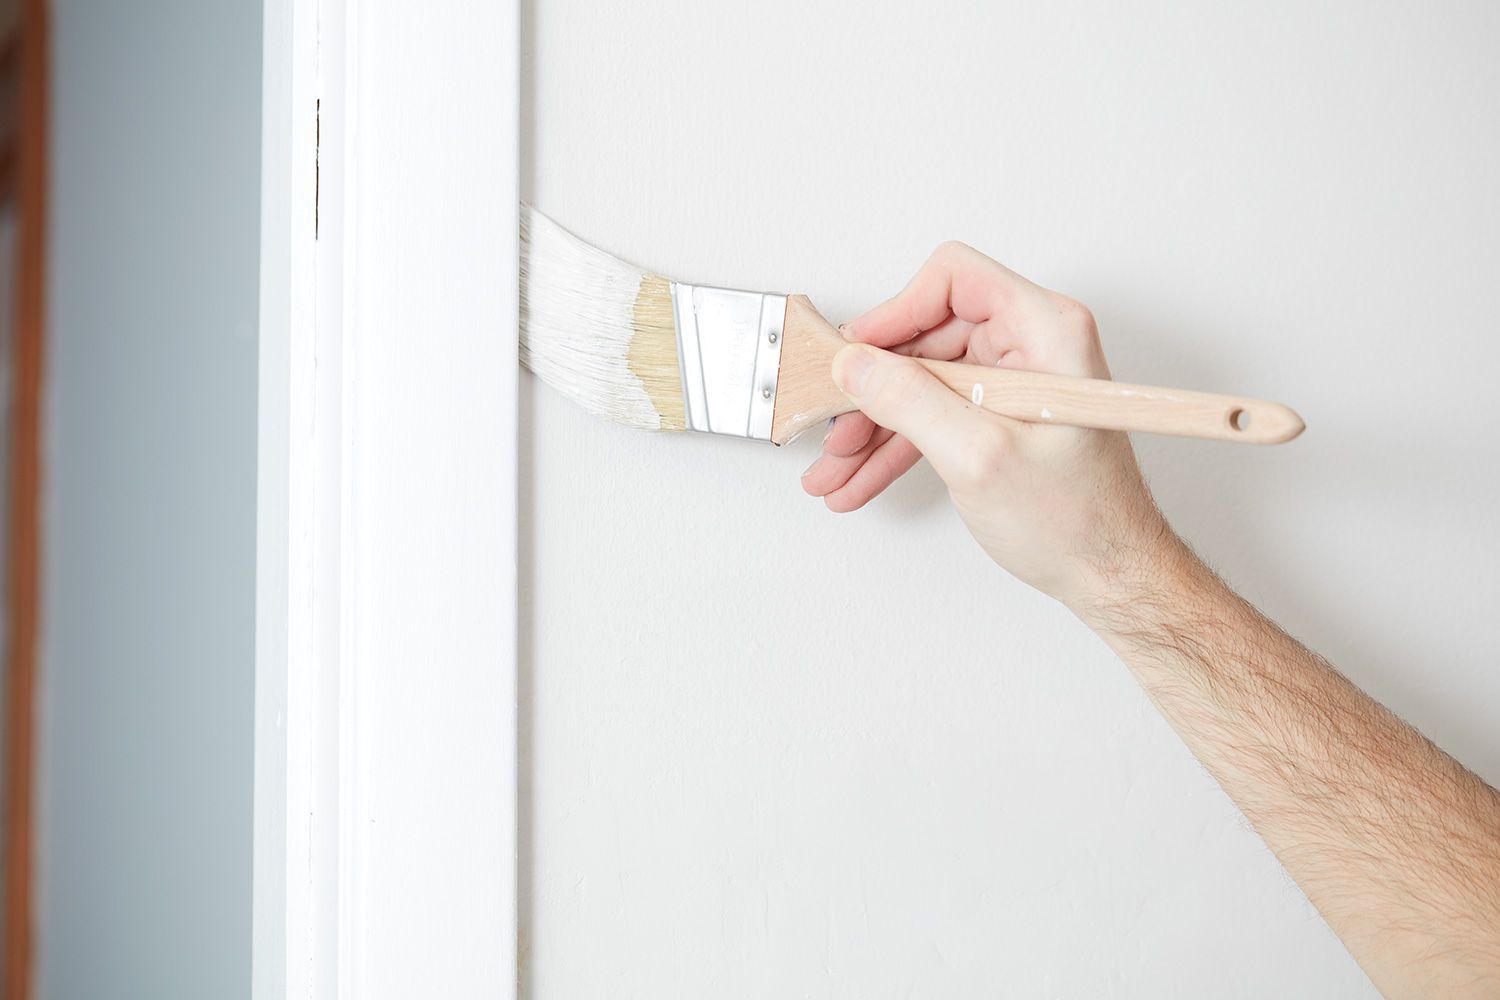 Should You Paint Trim Or Walls First? Paint Experts Advise